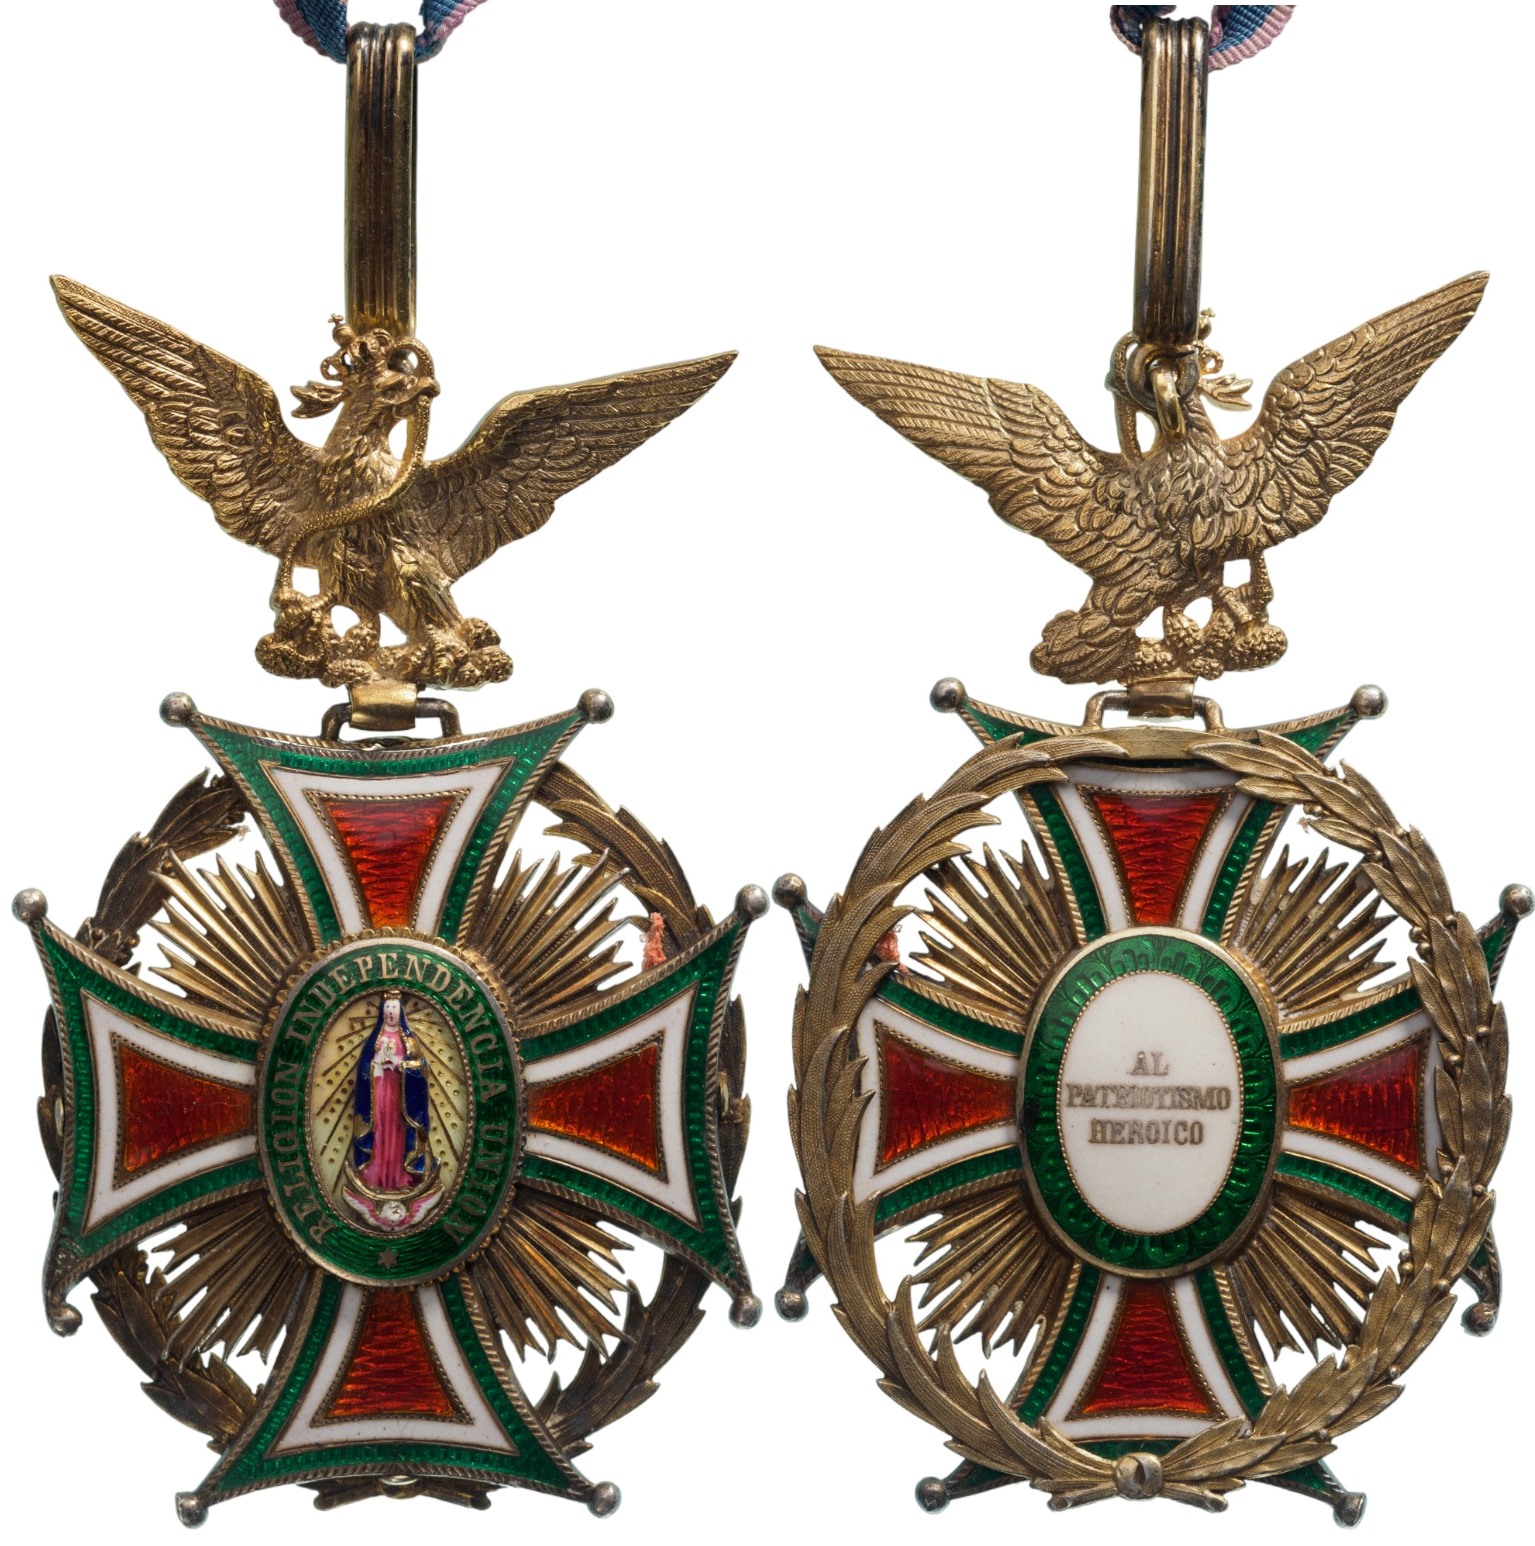 Order of Our Lady Guadalupe